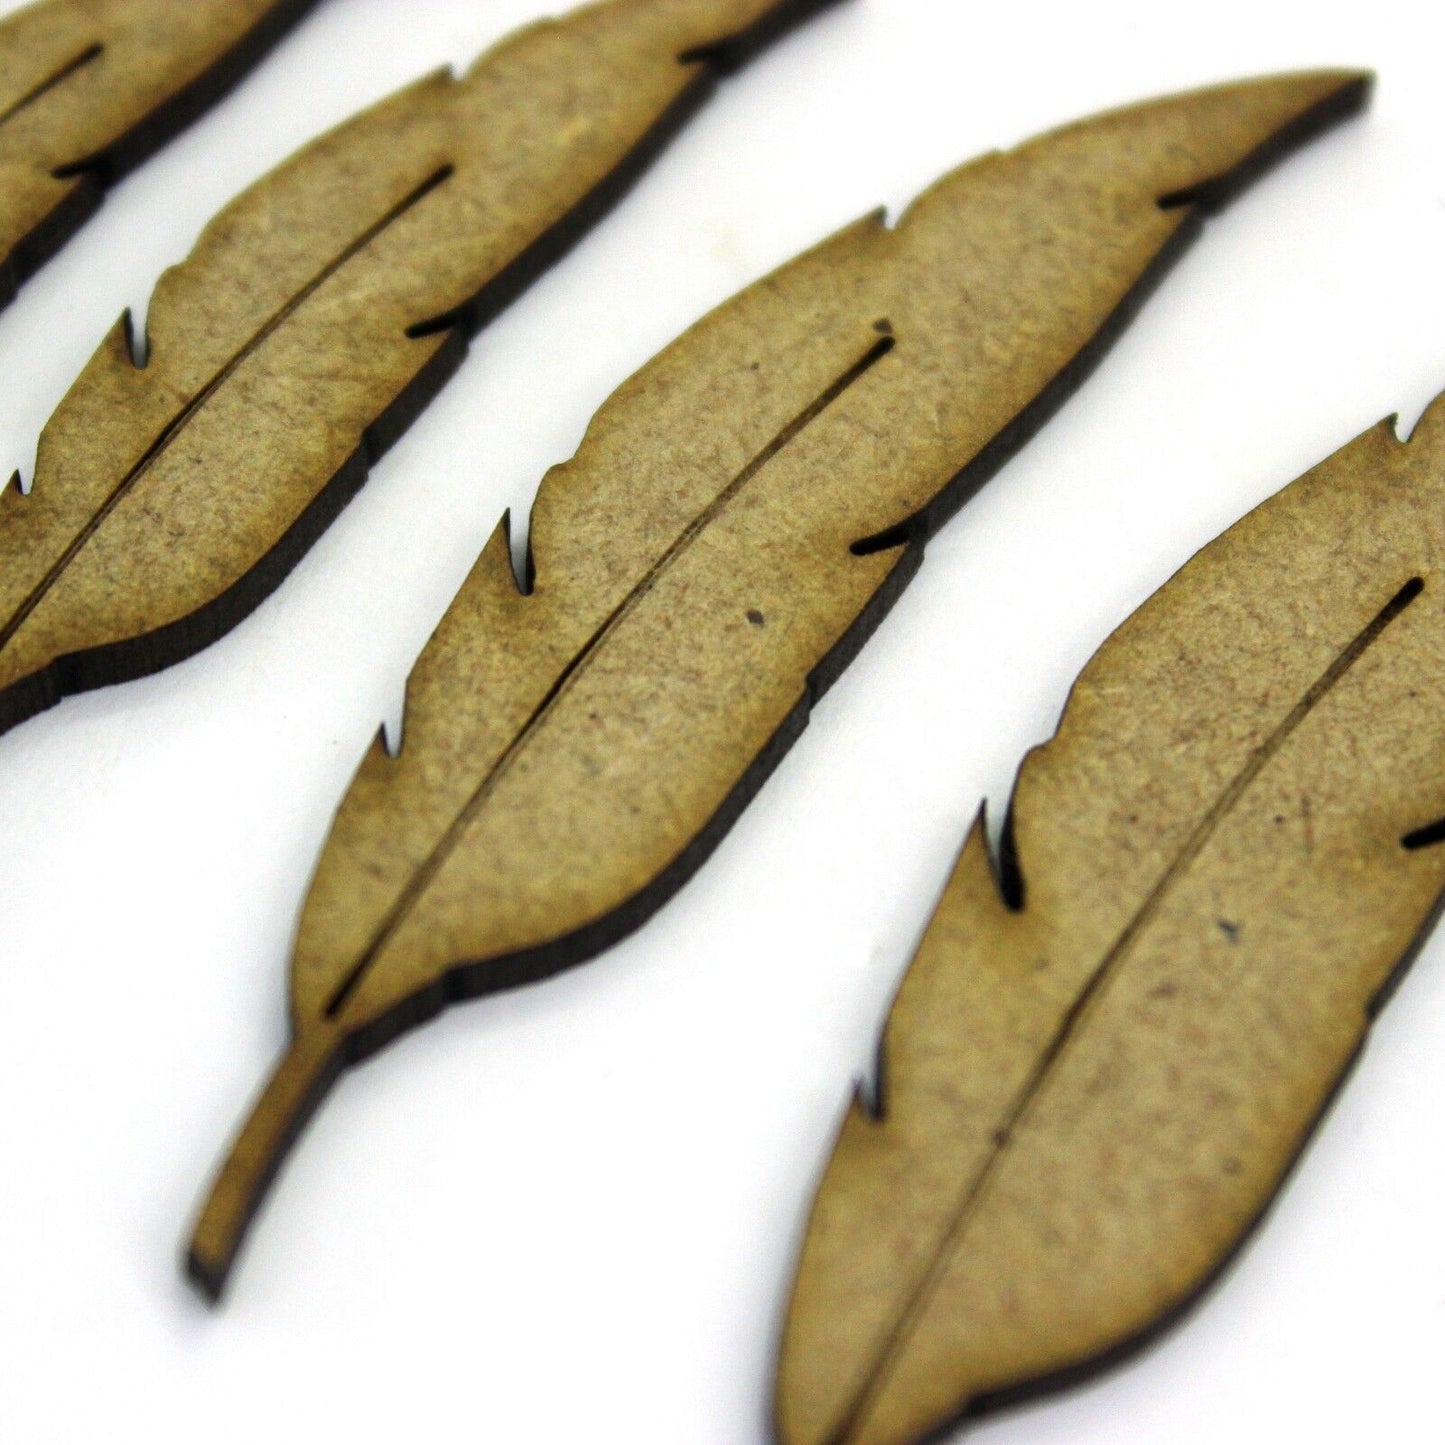 Feather Craft Shape, Various Sizes, 2mm MDF Wood. Bird, Quill. Mixed Media Art